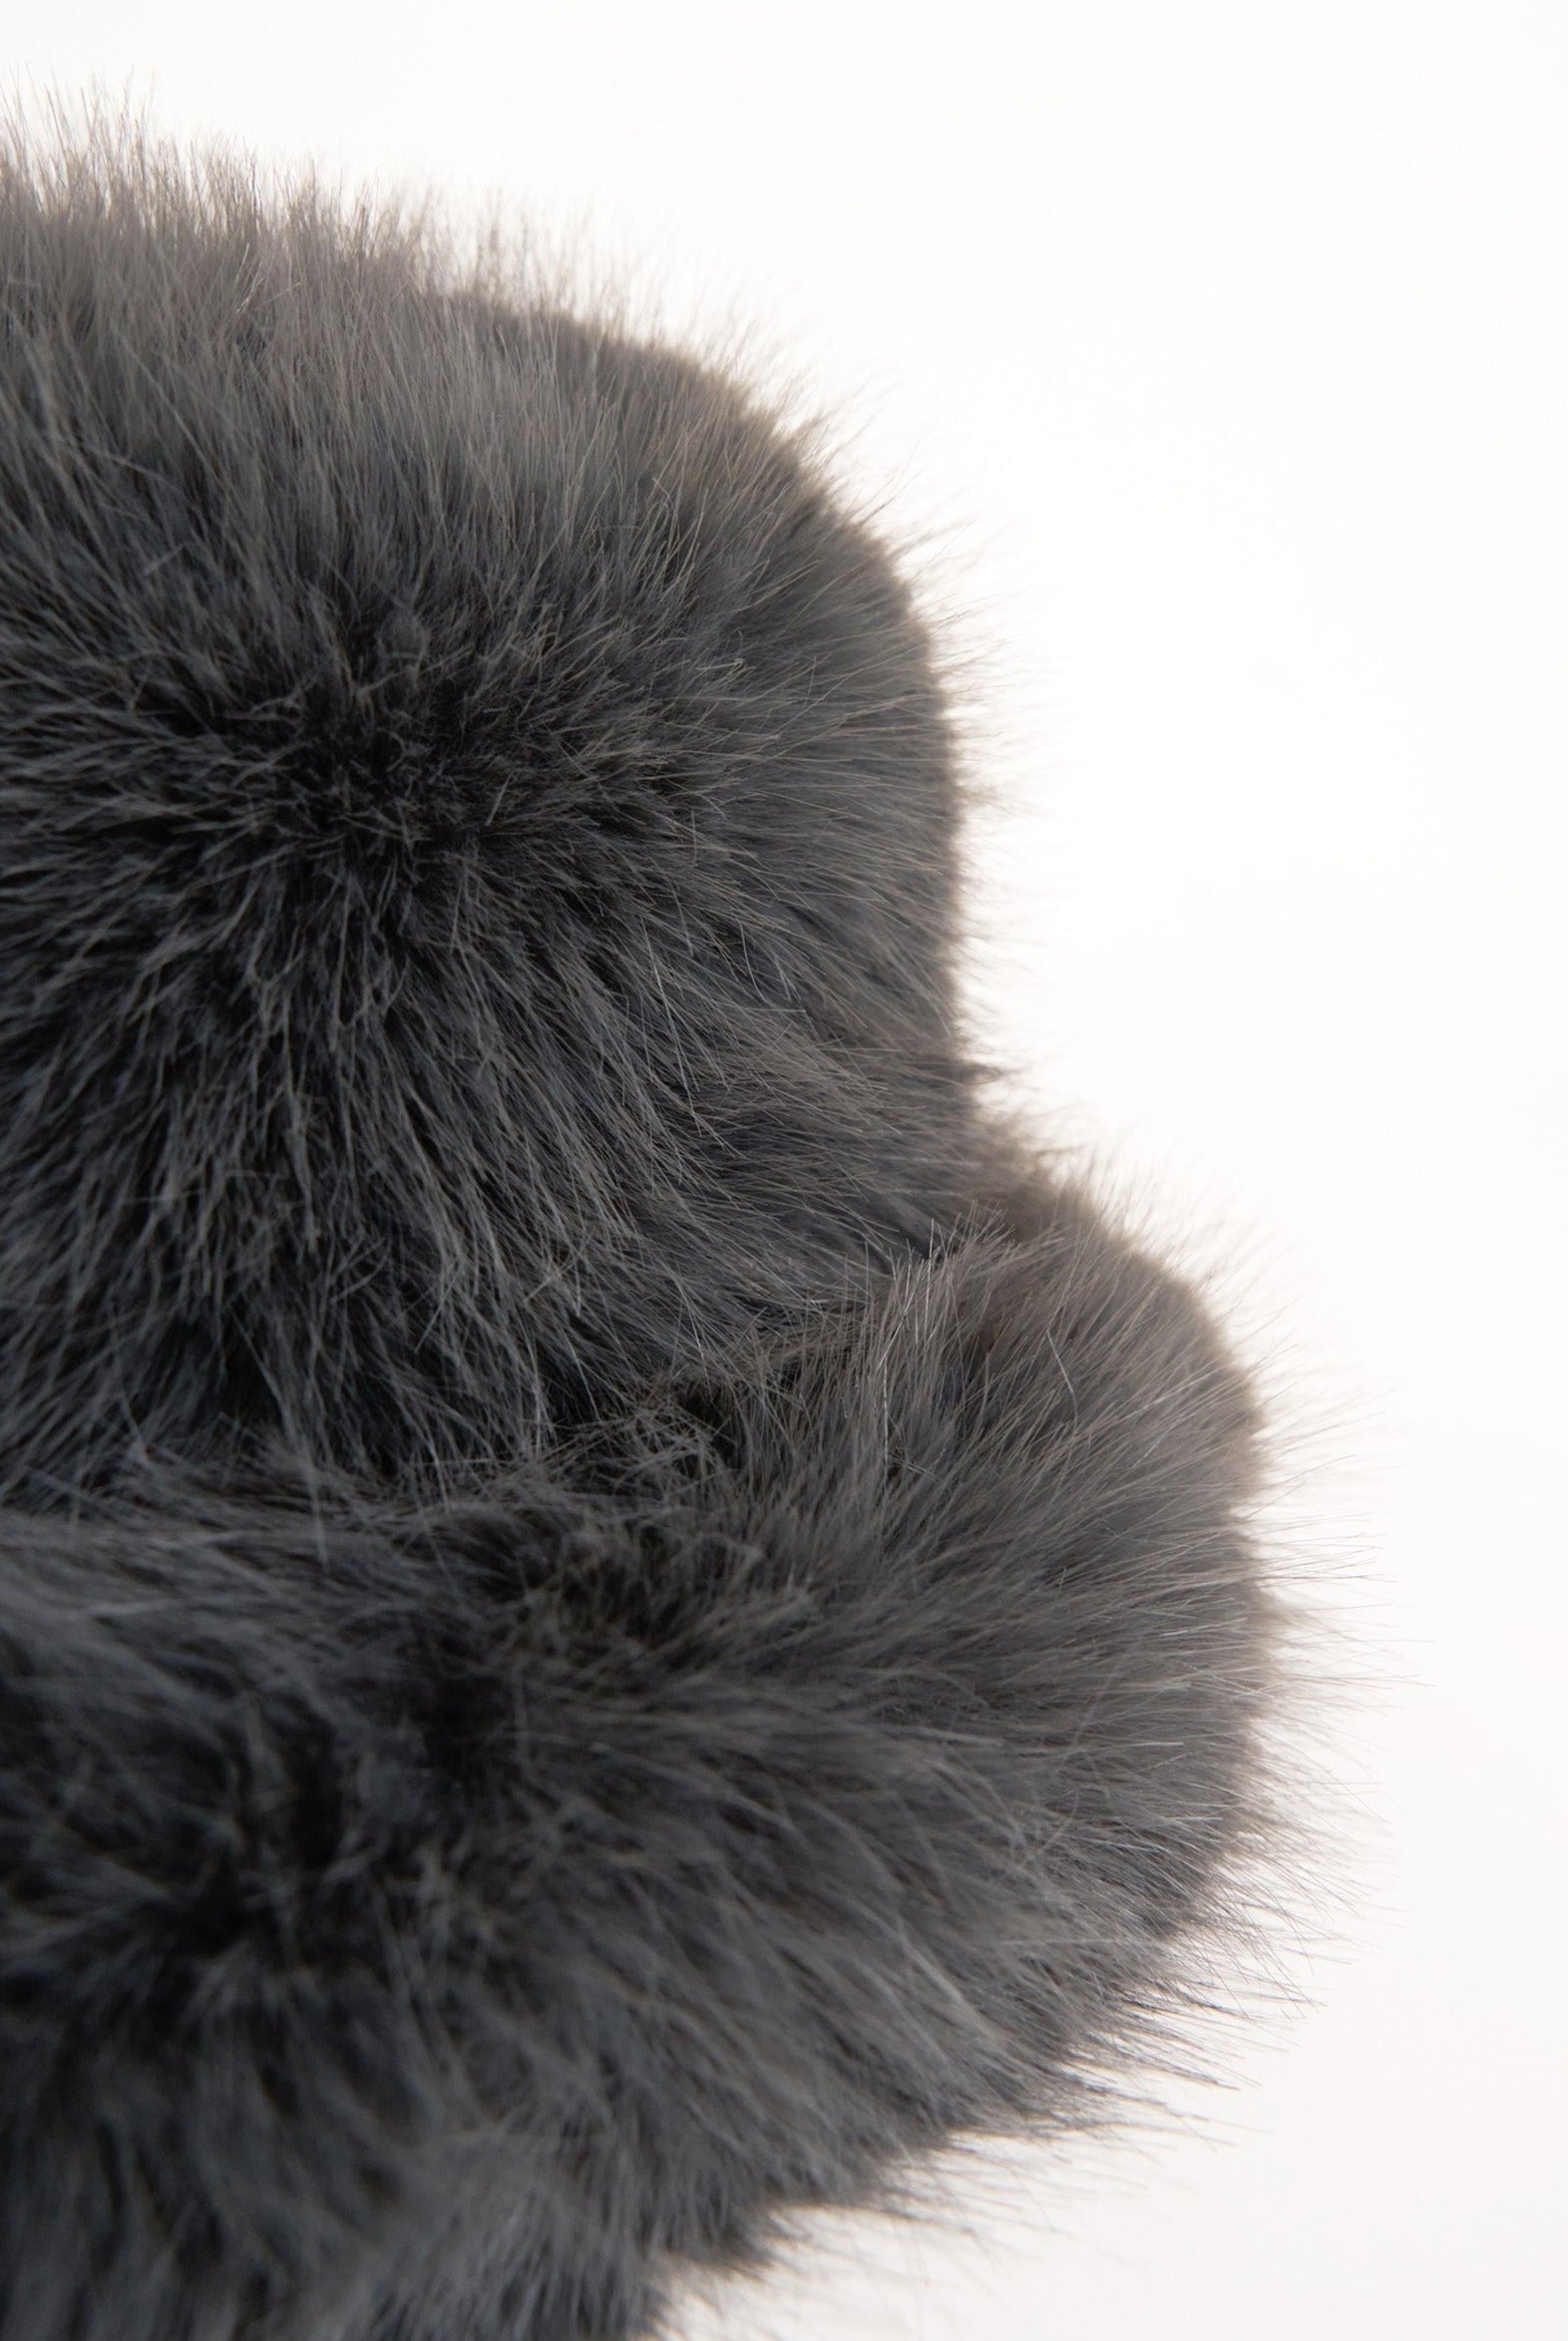 Oversized fur Bucket Hat in Grey | Hats | Hat | Winter | Autumn | Fall | Accessories | Cold weather | Ski | Oversized Fur Hat | Fluffy | Fluffy Fur Hat | Faux Fur | Vegan | Streetwear | Accessories | Women's Accessories 